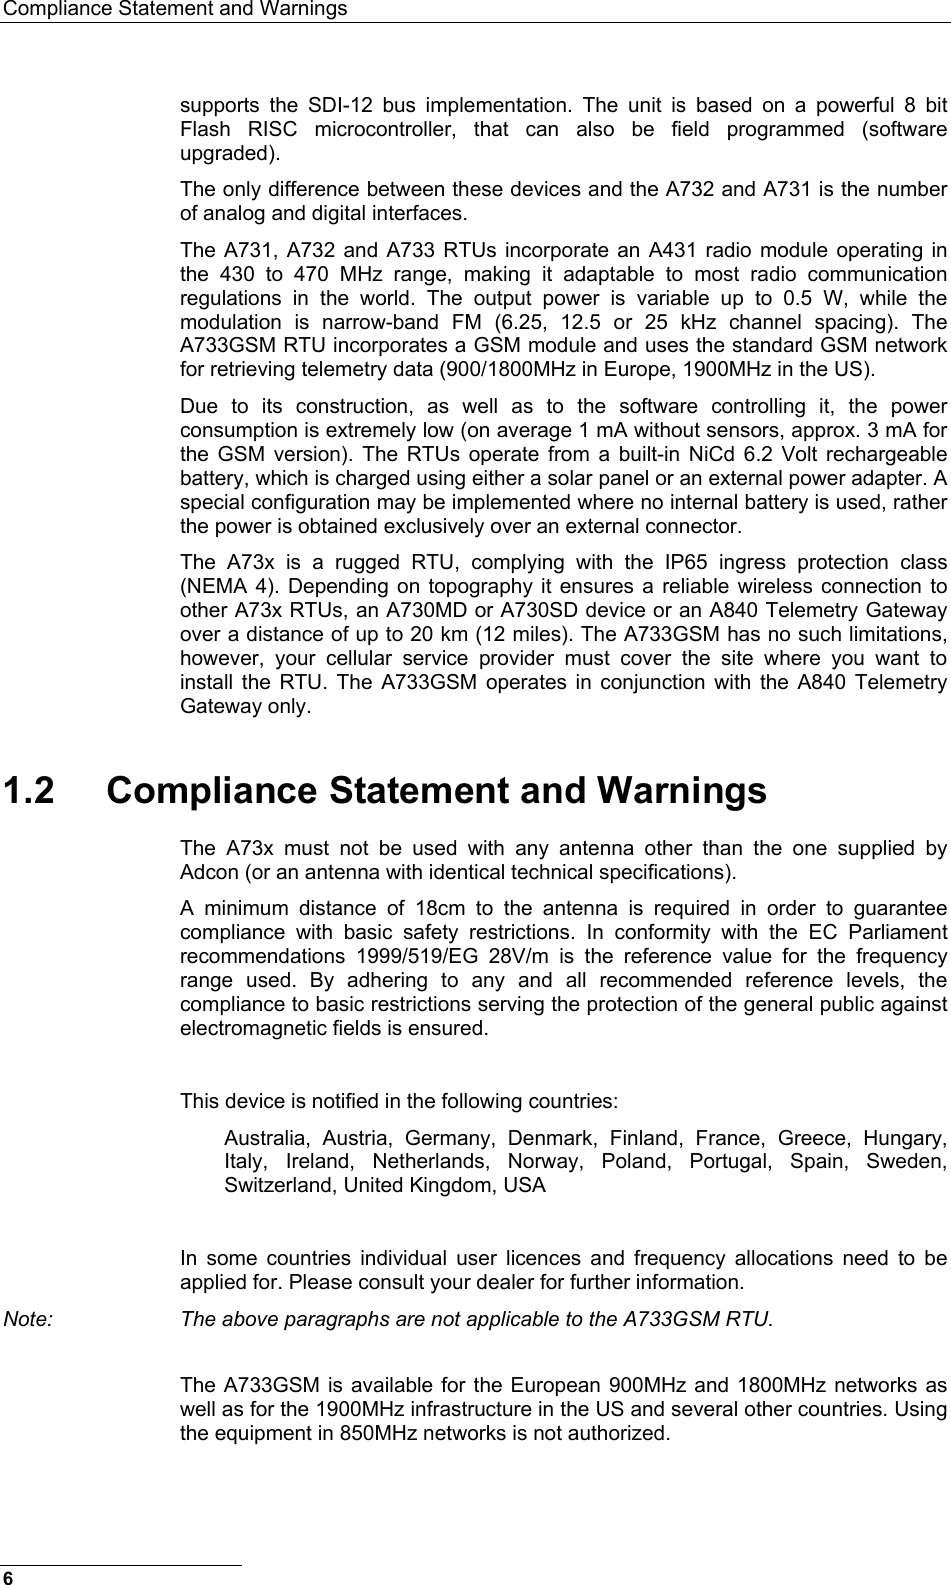 Compliance Statement and Warnings  supports the SDI-12 bus implementation. The unit is based on a powerful 8 bit Flash RISC microcontroller, that can also be field programmed (software upgraded). The only difference between these devices and the A732 and A731 is the number of analog and digital interfaces. The A731, A732 and A733 RTUs incorporate an A431 radio module operating in the 430 to 470 MHz range, making it adaptable to most radio communication regulations in the world. The output power is variable up to 0.5 W, while the modulation is narrow-band FM (6.25, 12.5 or 25 kHz channel spacing). The A733GSM RTU incorporates a GSM module and uses the standard GSM network for retrieving telemetry data (900/1800MHz in Europe, 1900MHz in the US). Due to its construction, as well as to the software controlling it, the power consumption is extremely low (on average 1 mA without sensors, approx. 3 mA for the GSM version). The RTUs operate from a built-in NiCd 6.2 Volt rechargeable battery, which is charged using either a solar panel or an external power adapter. A special configuration may be implemented where no internal battery is used, rather the power is obtained exclusively over an external connector. The A73x is a rugged RTU, complying with the IP65 ingress protection class (NEMA 4). Depending on topography it ensures a reliable wireless connection to other A73x RTUs, an A730MD or A730SD device or an A840 Telemetry Gateway over a distance of up to 20 km (12 miles). The A733GSM has no such limitations, however, your cellular service provider must cover the site where you want to install the RTU. The A733GSM operates in conjunction with the A840 Telemetry Gateway only. 1.2  Compliance Statement and Warnings The A73x must not be used with any antenna other than the one supplied by Adcon (or an antenna with identical technical specifications). A minimum distance of 18cm to the antenna is required in order to guarantee compliance with basic safety restrictions. In conformity with the EC Parliament recommendations 1999/519/EG 28V/m is the reference value for the frequency range used. By adhering to any and all recommended reference levels, the compliance to basic restrictions serving the protection of the general public against electromagnetic fields is ensured.  This device is notified in the following countries: Australia, Austria, Germany, Denmark, Finland, France, Greece, Hungary, Italy, Ireland, Netherlands, Norway, Poland, Portugal, Spain, Sweden, Switzerland, United Kingdom, USA  In some countries individual user licences and frequency allocations need to be applied for. Please consult your dealer for further information. Note:  The above paragraphs are not applicable to the A733GSM RTU.  The A733GSM is available for the European 900MHz and 1800MHz networks as well as for the 1900MHz infrastructure in the US and several other countries. Using the equipment in 850MHz networks is not authorized.  6 